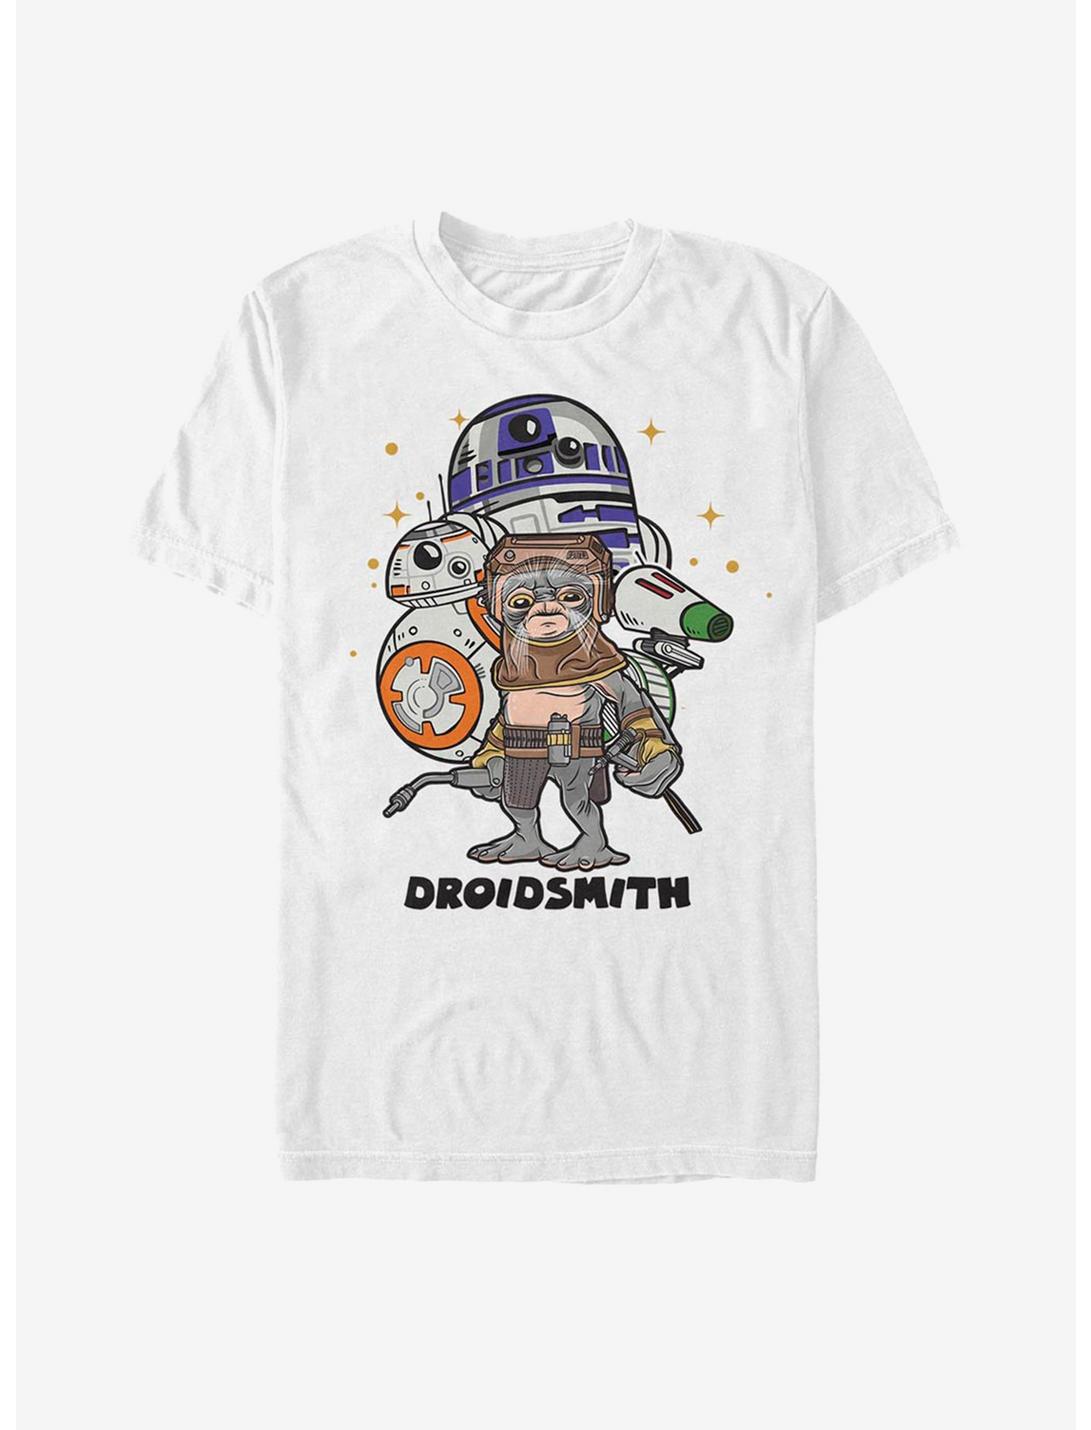 Star Wars Episode IX The Rise Of Skywalker Droid Smith T-Shirt, WHITE, hi-res